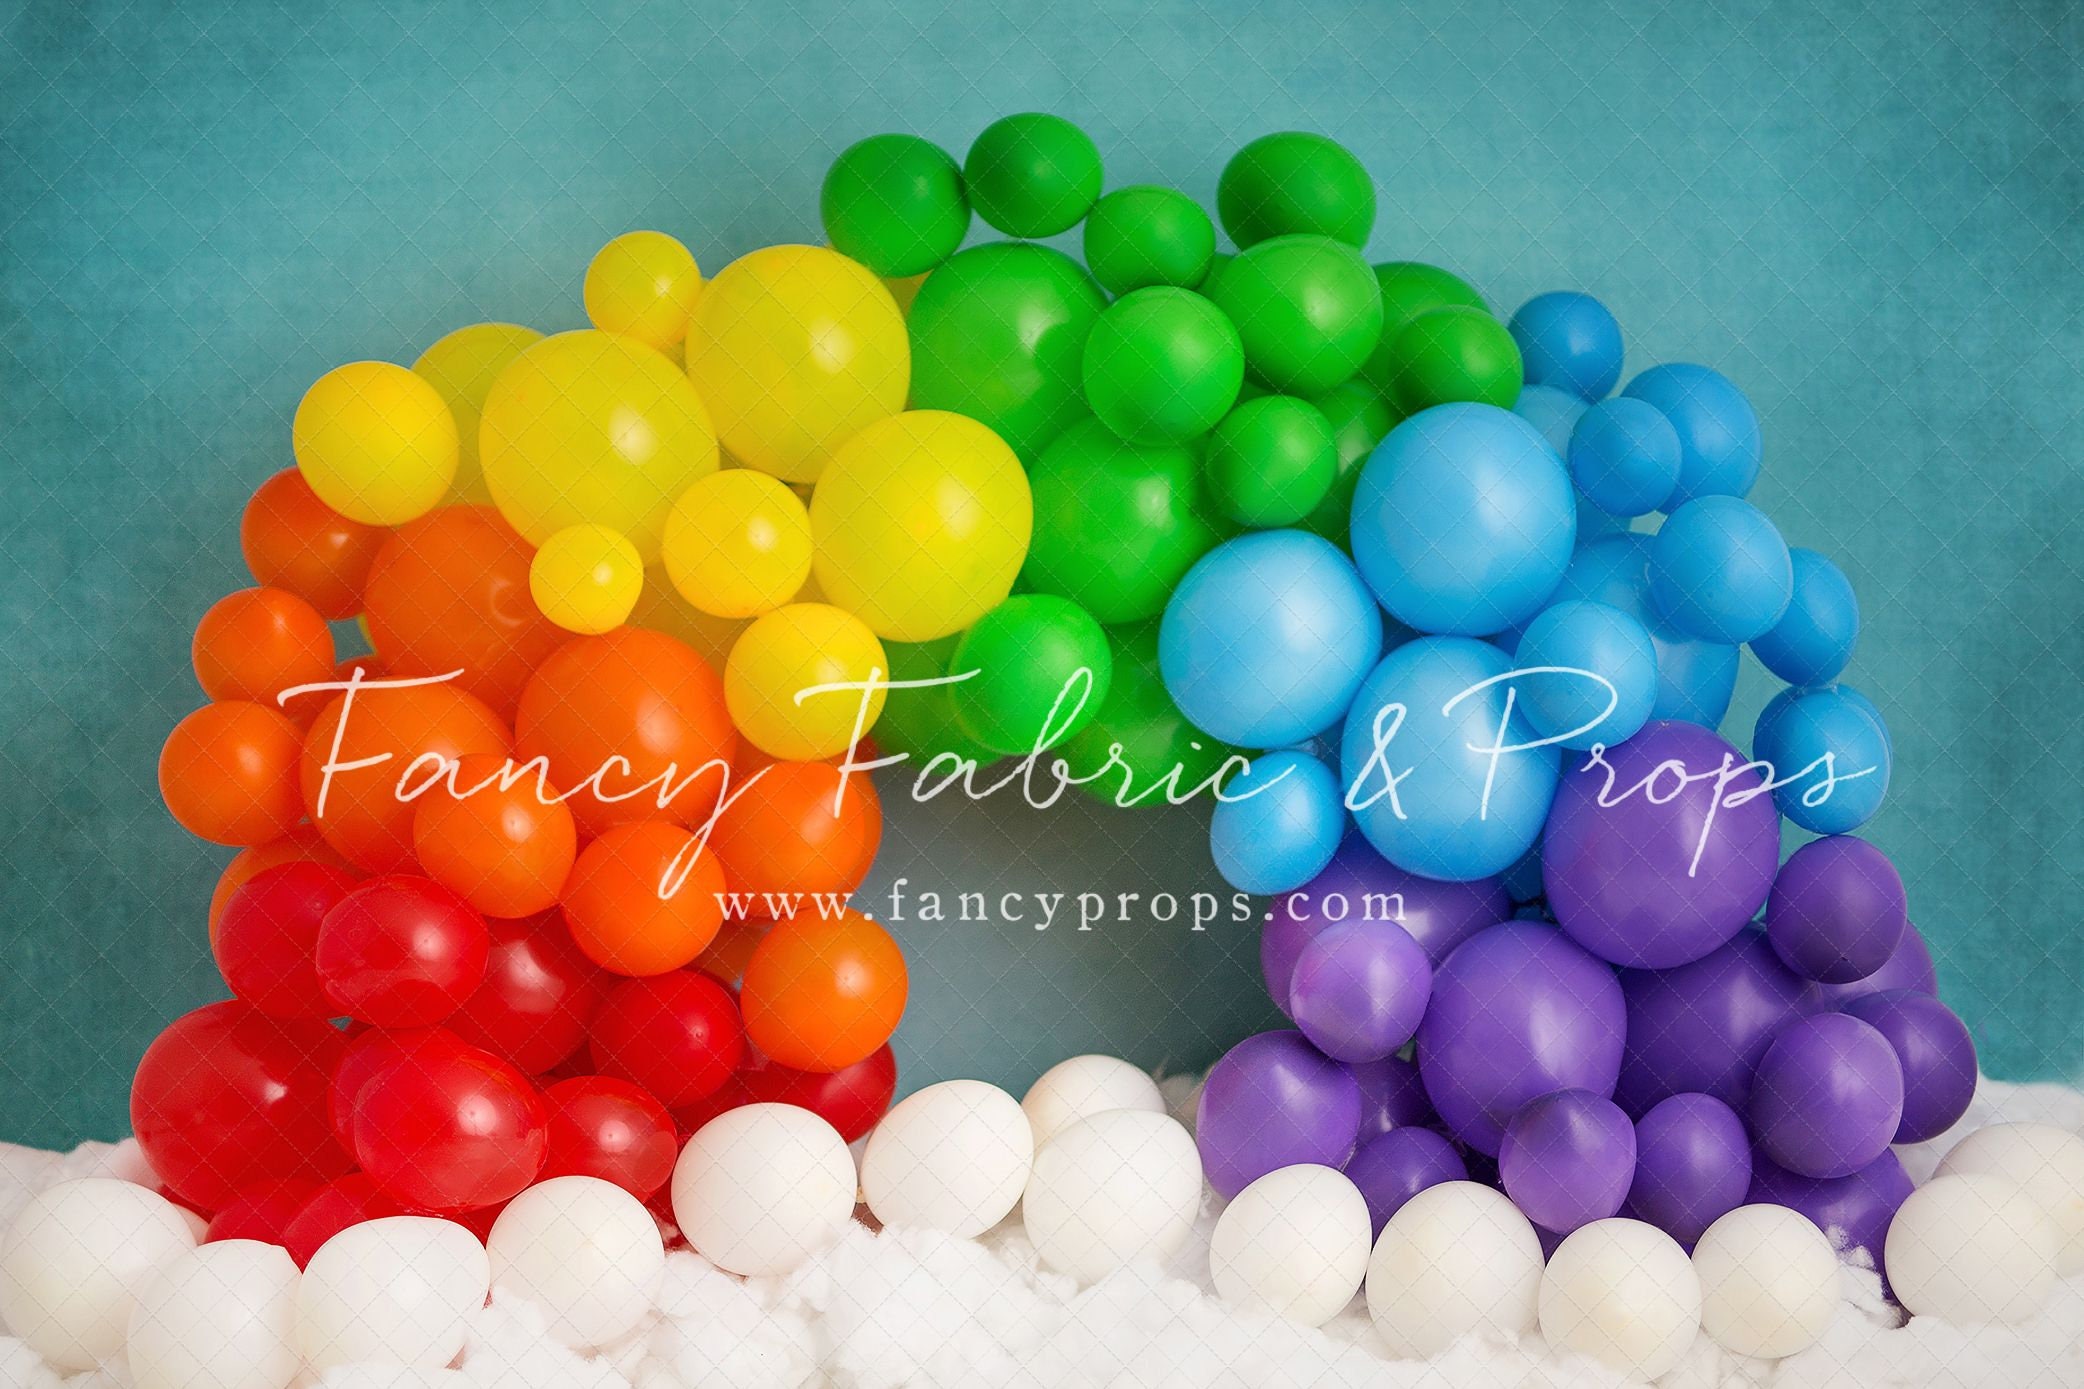 Pastel Palette Balloon Wall Poly Paper Photography Backdrop 